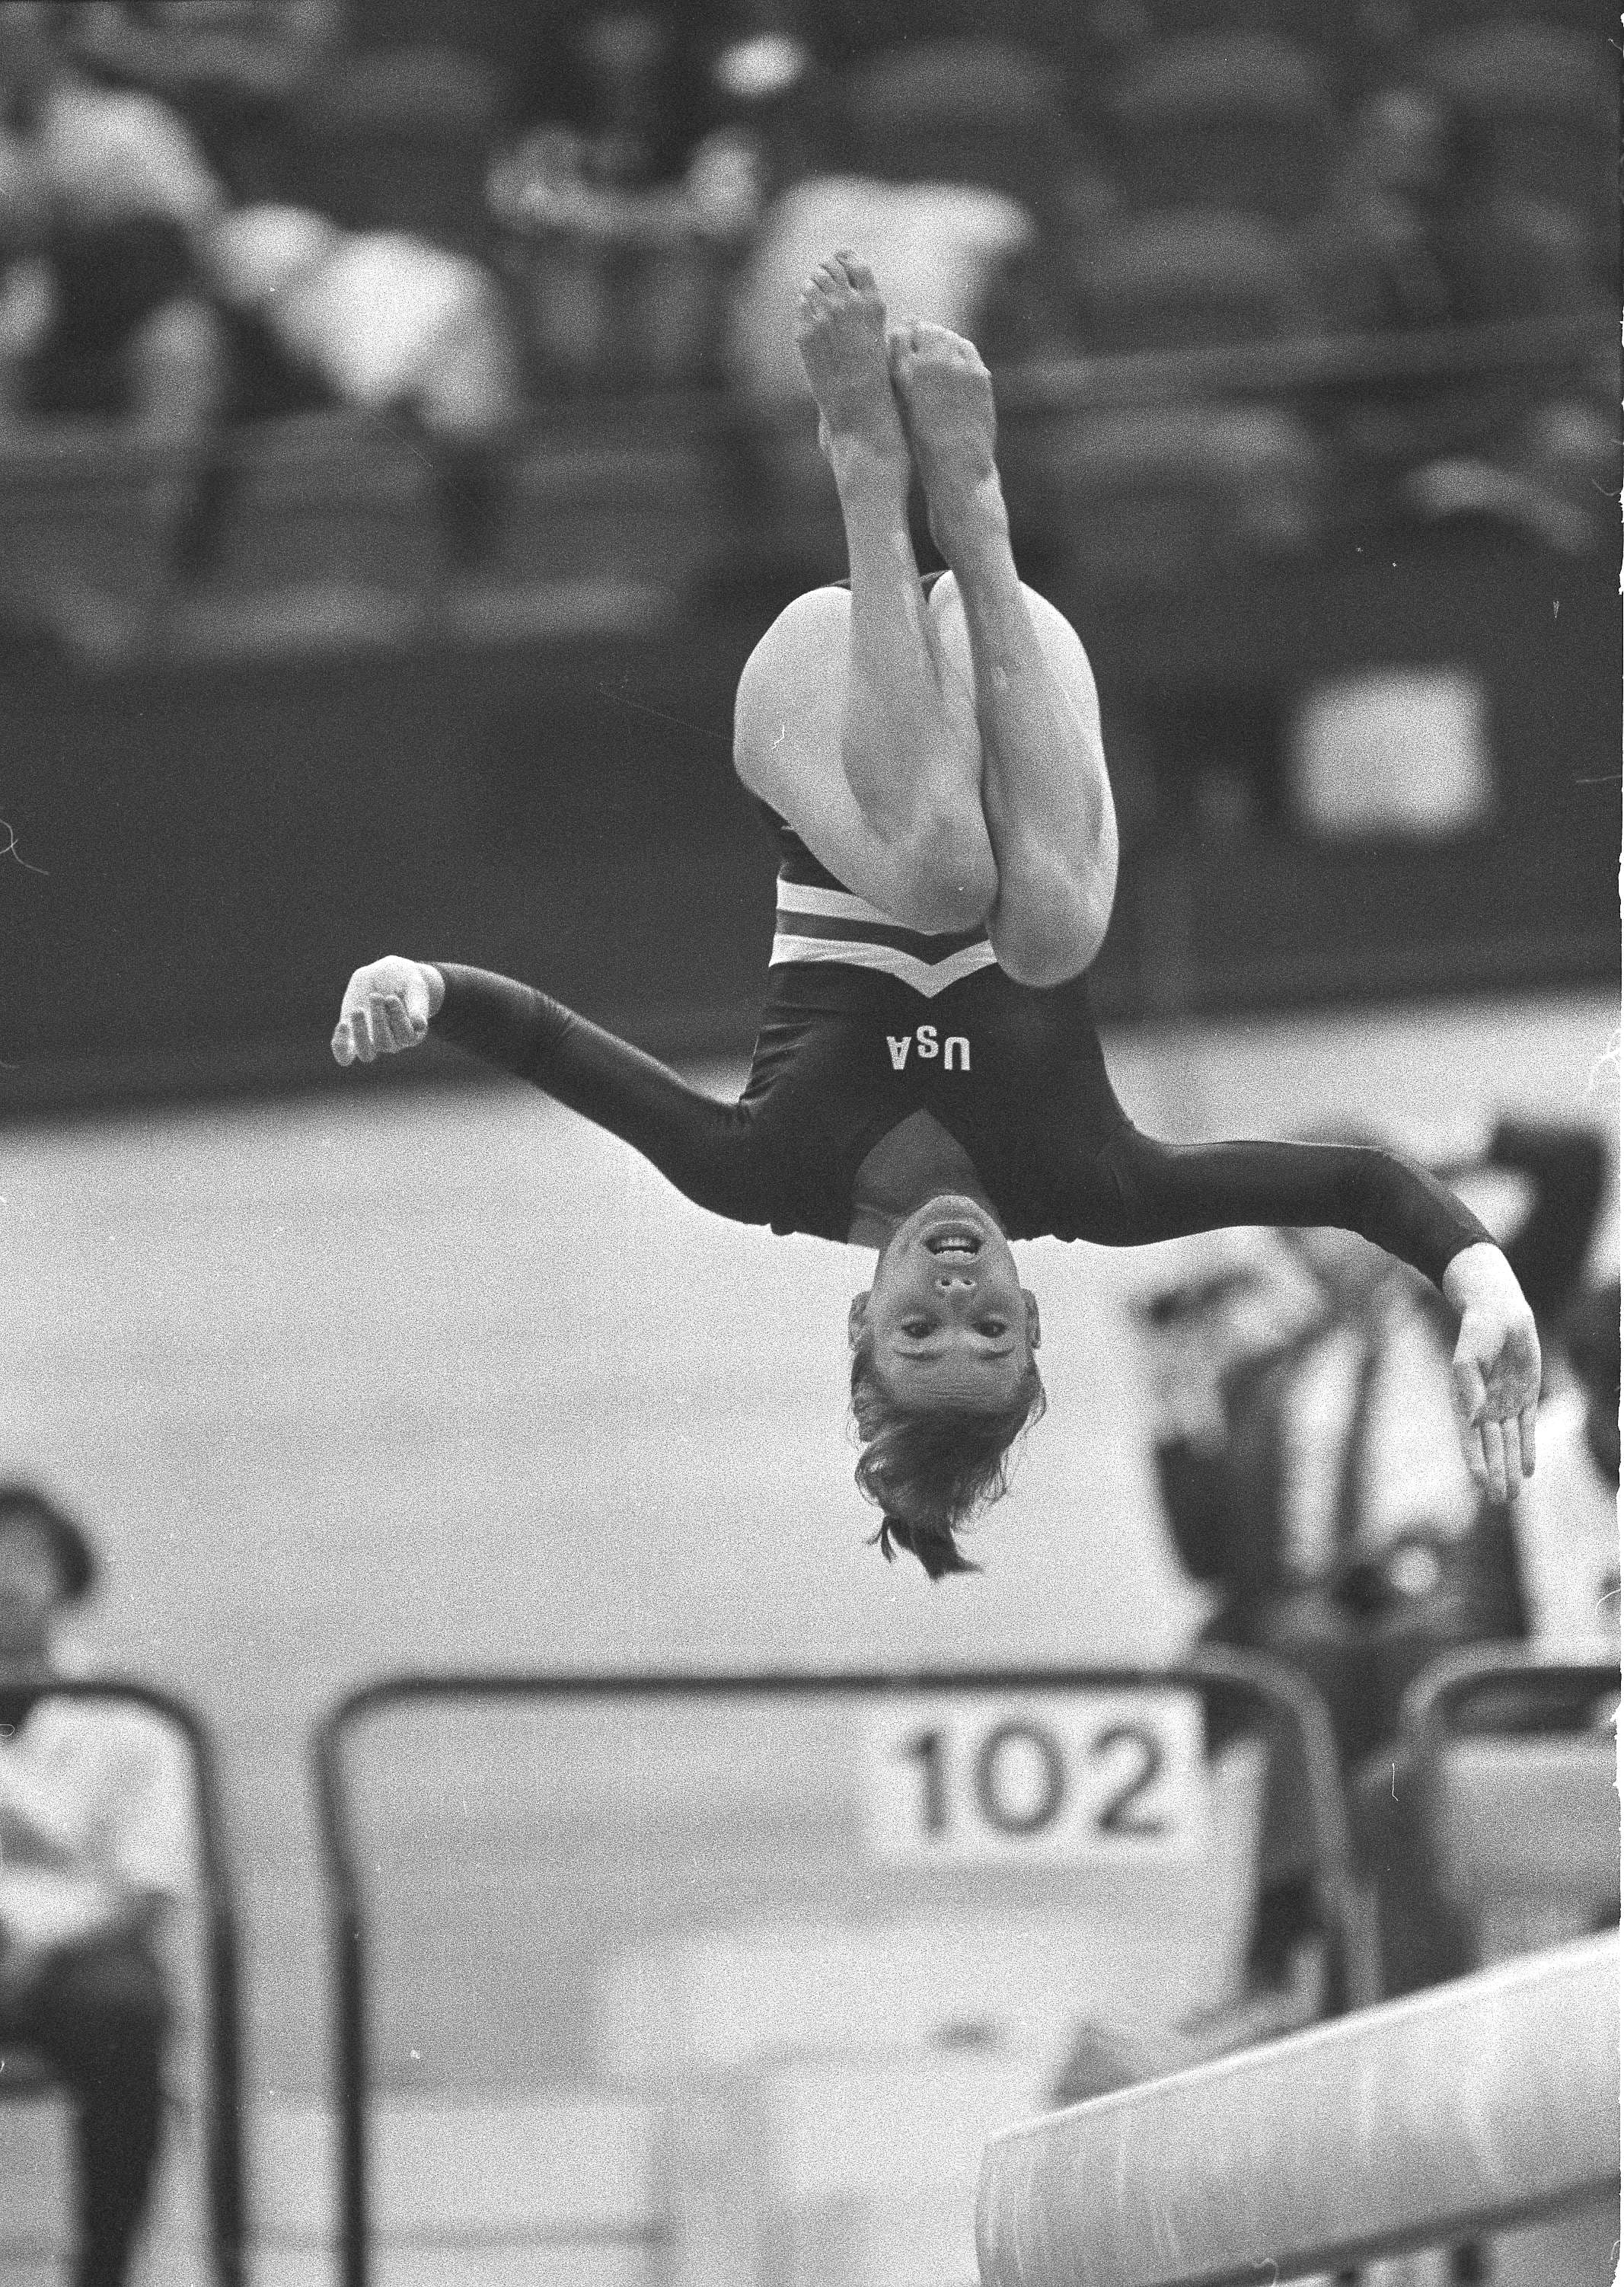 Former Gymnastics Champ Jennifer Sey Speaks Out Against Abuses In Her Sport  | Only A Game